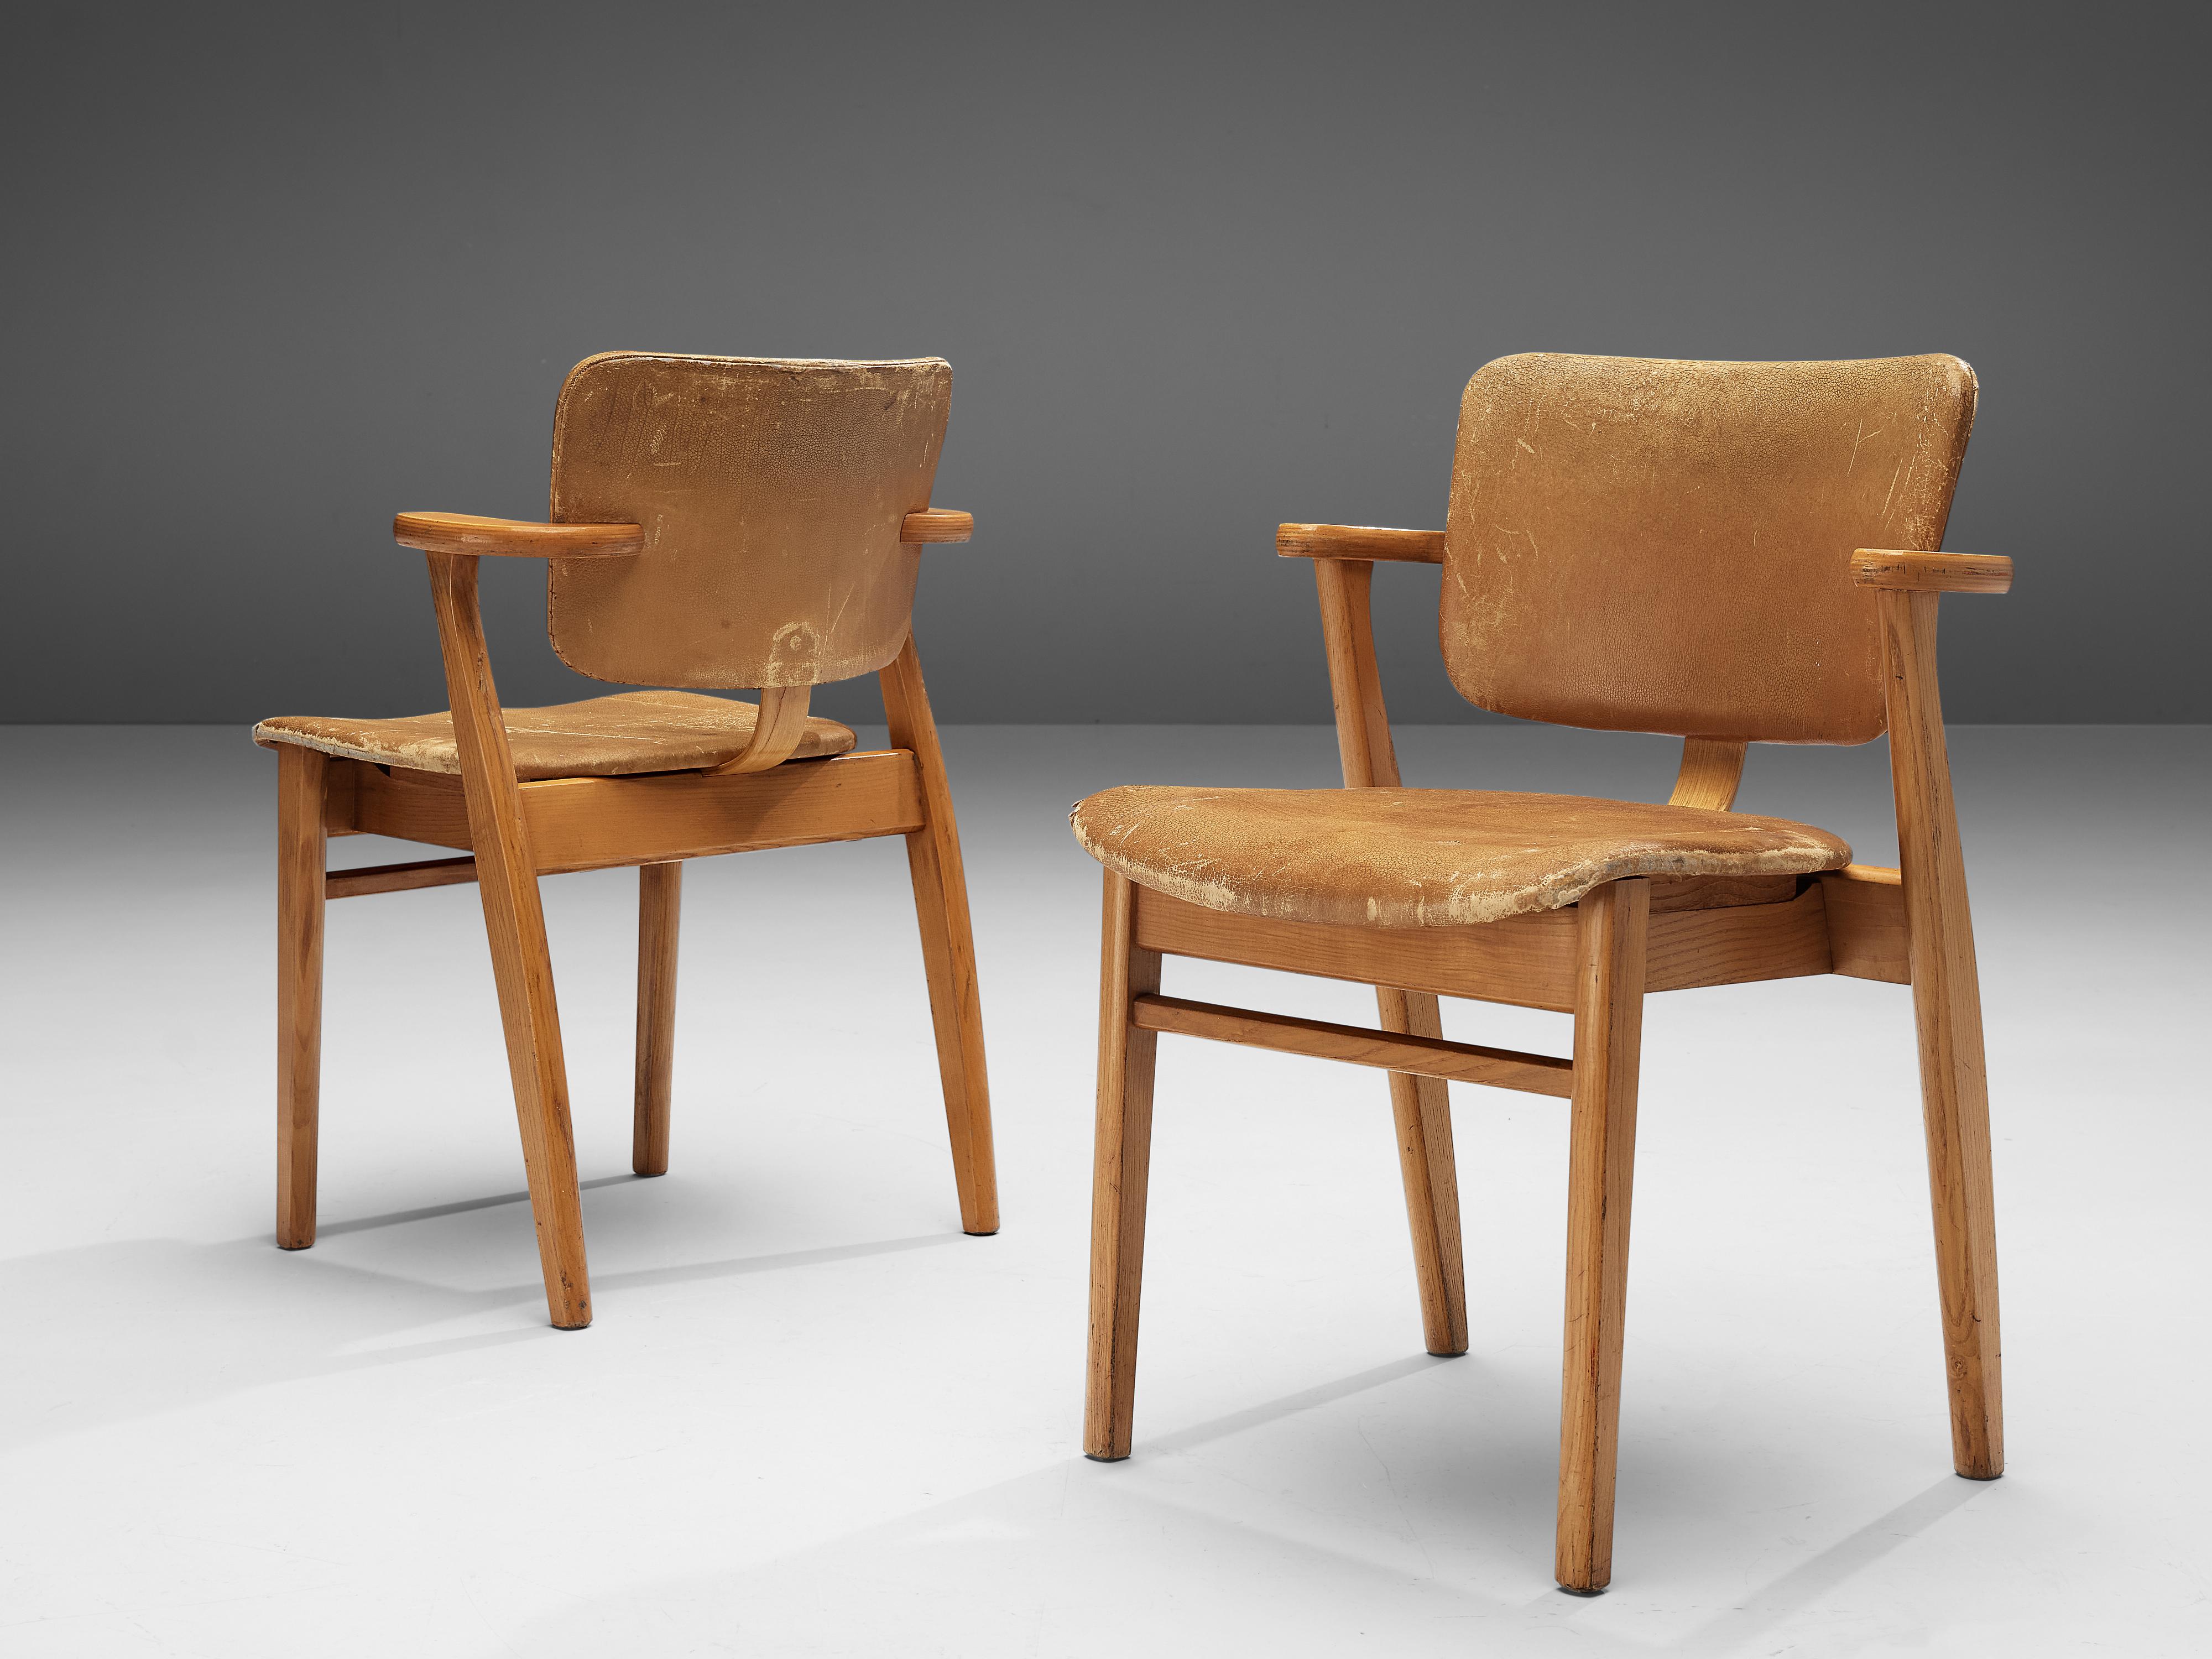 Ilmari Tapiovaara, armchairs model 'Domus', beech, leather, Finland, design 1953

Early 'Domus' armchairs by Ilmari Tapiovaara. The frame is made from solid beech wood and the seat and backrest are upholstered in a patinated leather This model was